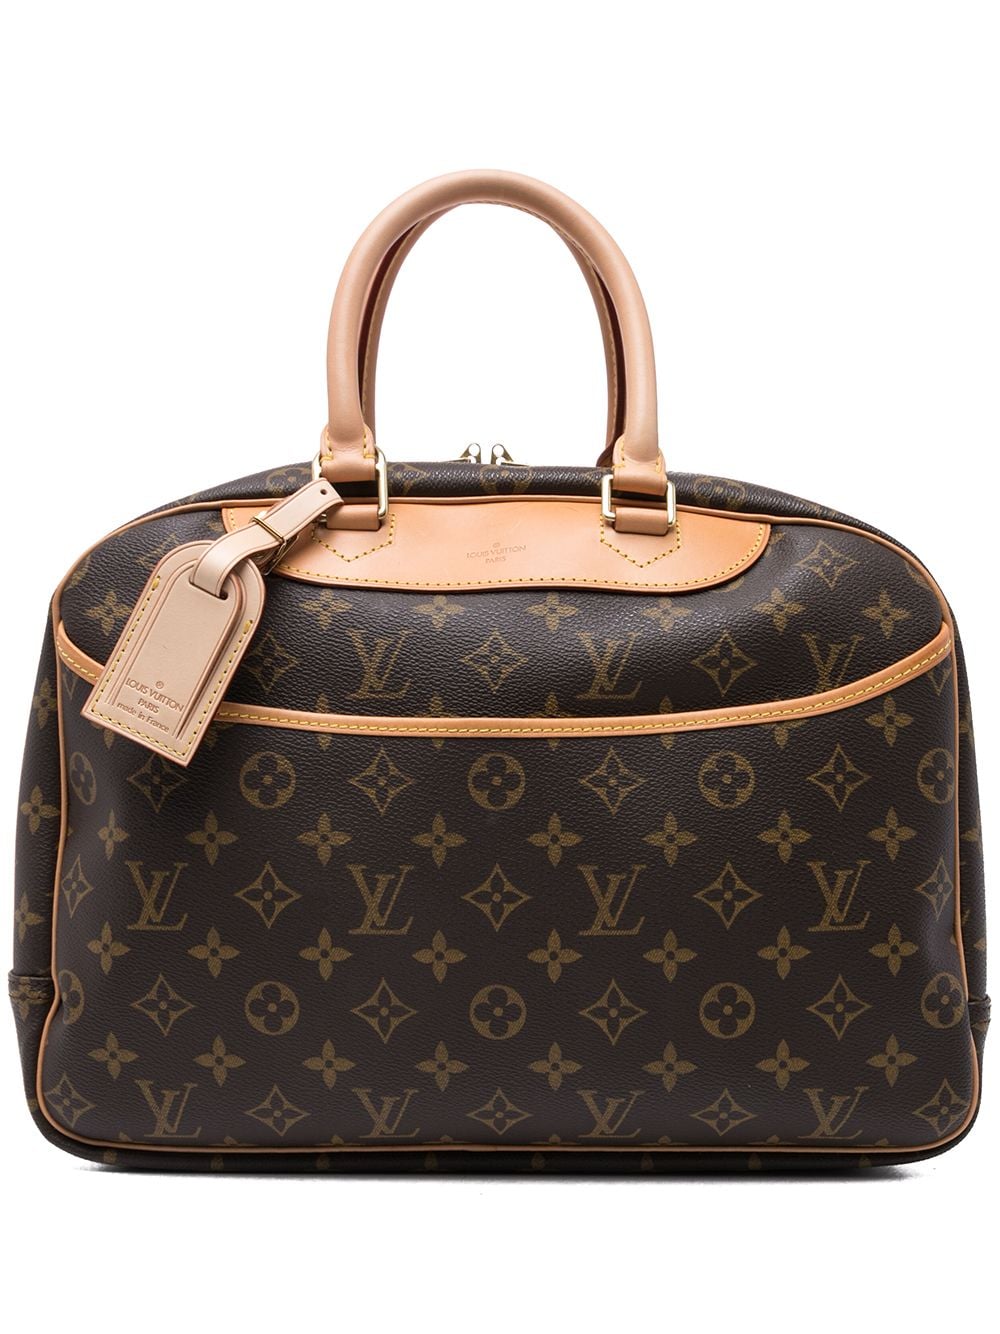 Louis Vuitton 2008 - 36 For Sale on 1stDibs